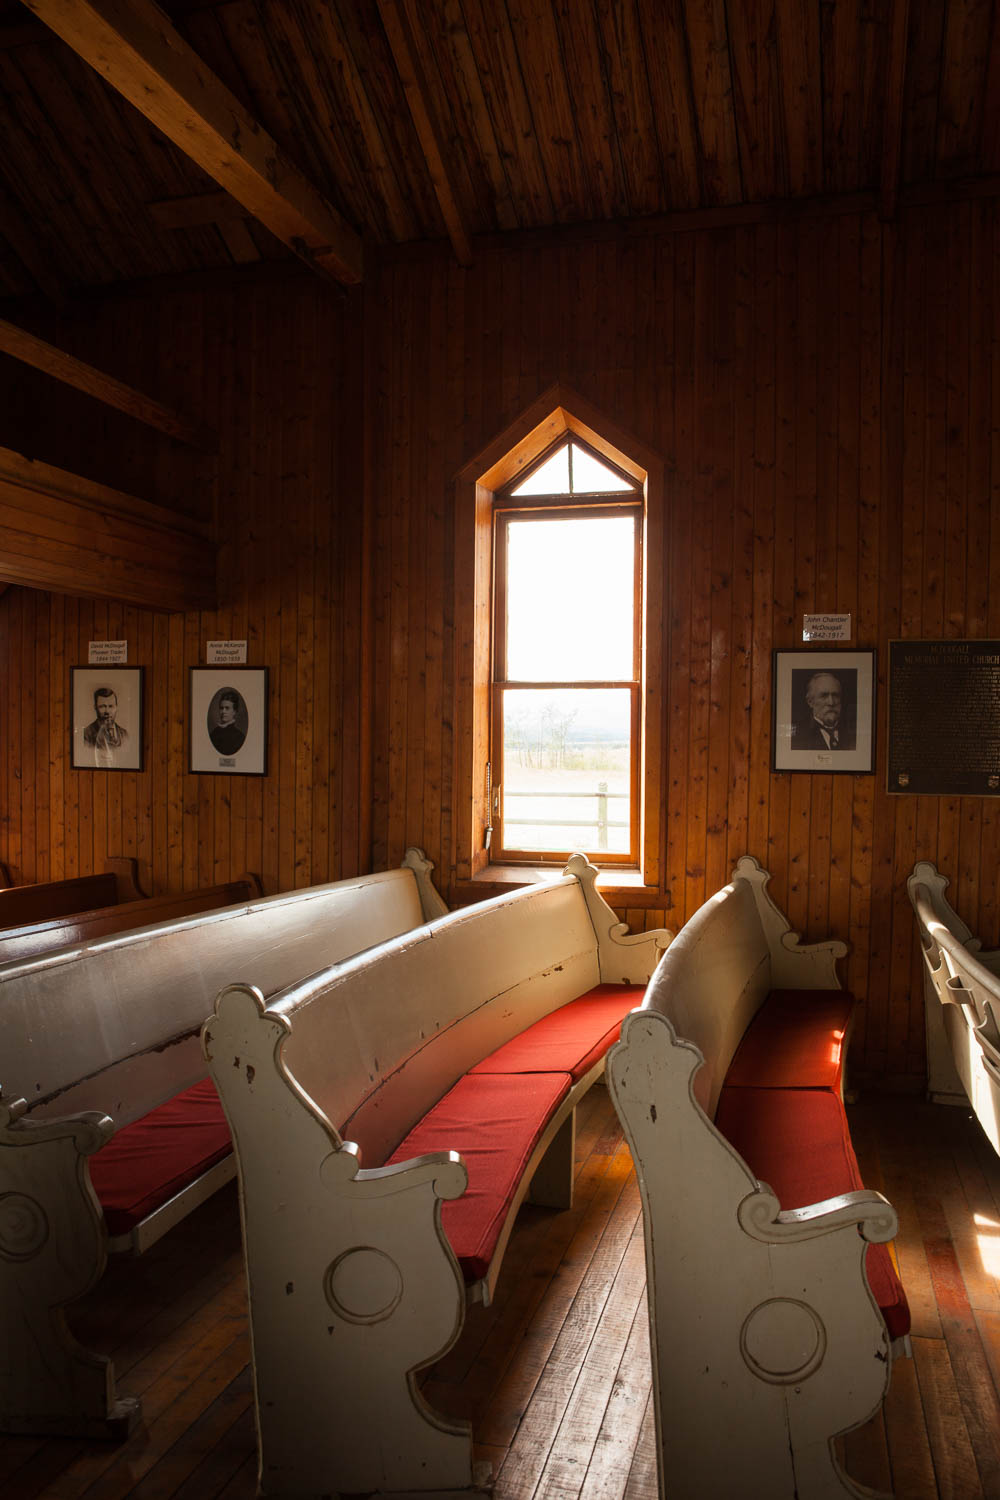 Photograph of the interior of the McDougall United Memorial Church depicting pews and wood panelling.